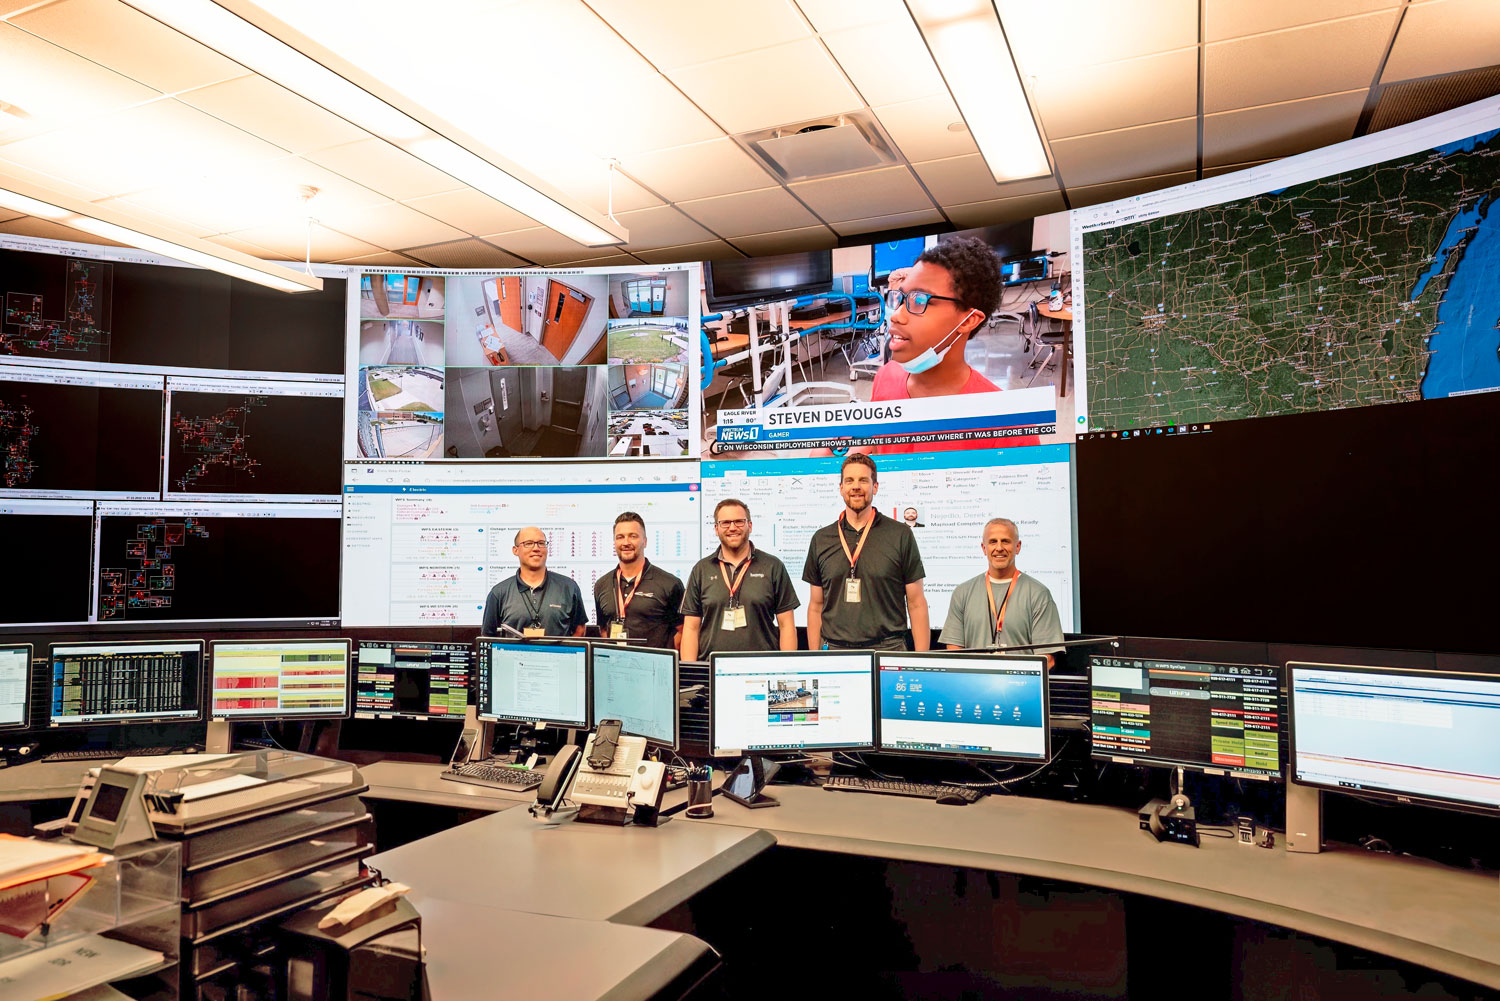 Thumbnail - For control, each operator workstation includes a PC loaded with Extron EMS Express Mobile Software that facilitates content selection and display in customized windows arranged across the videowall.